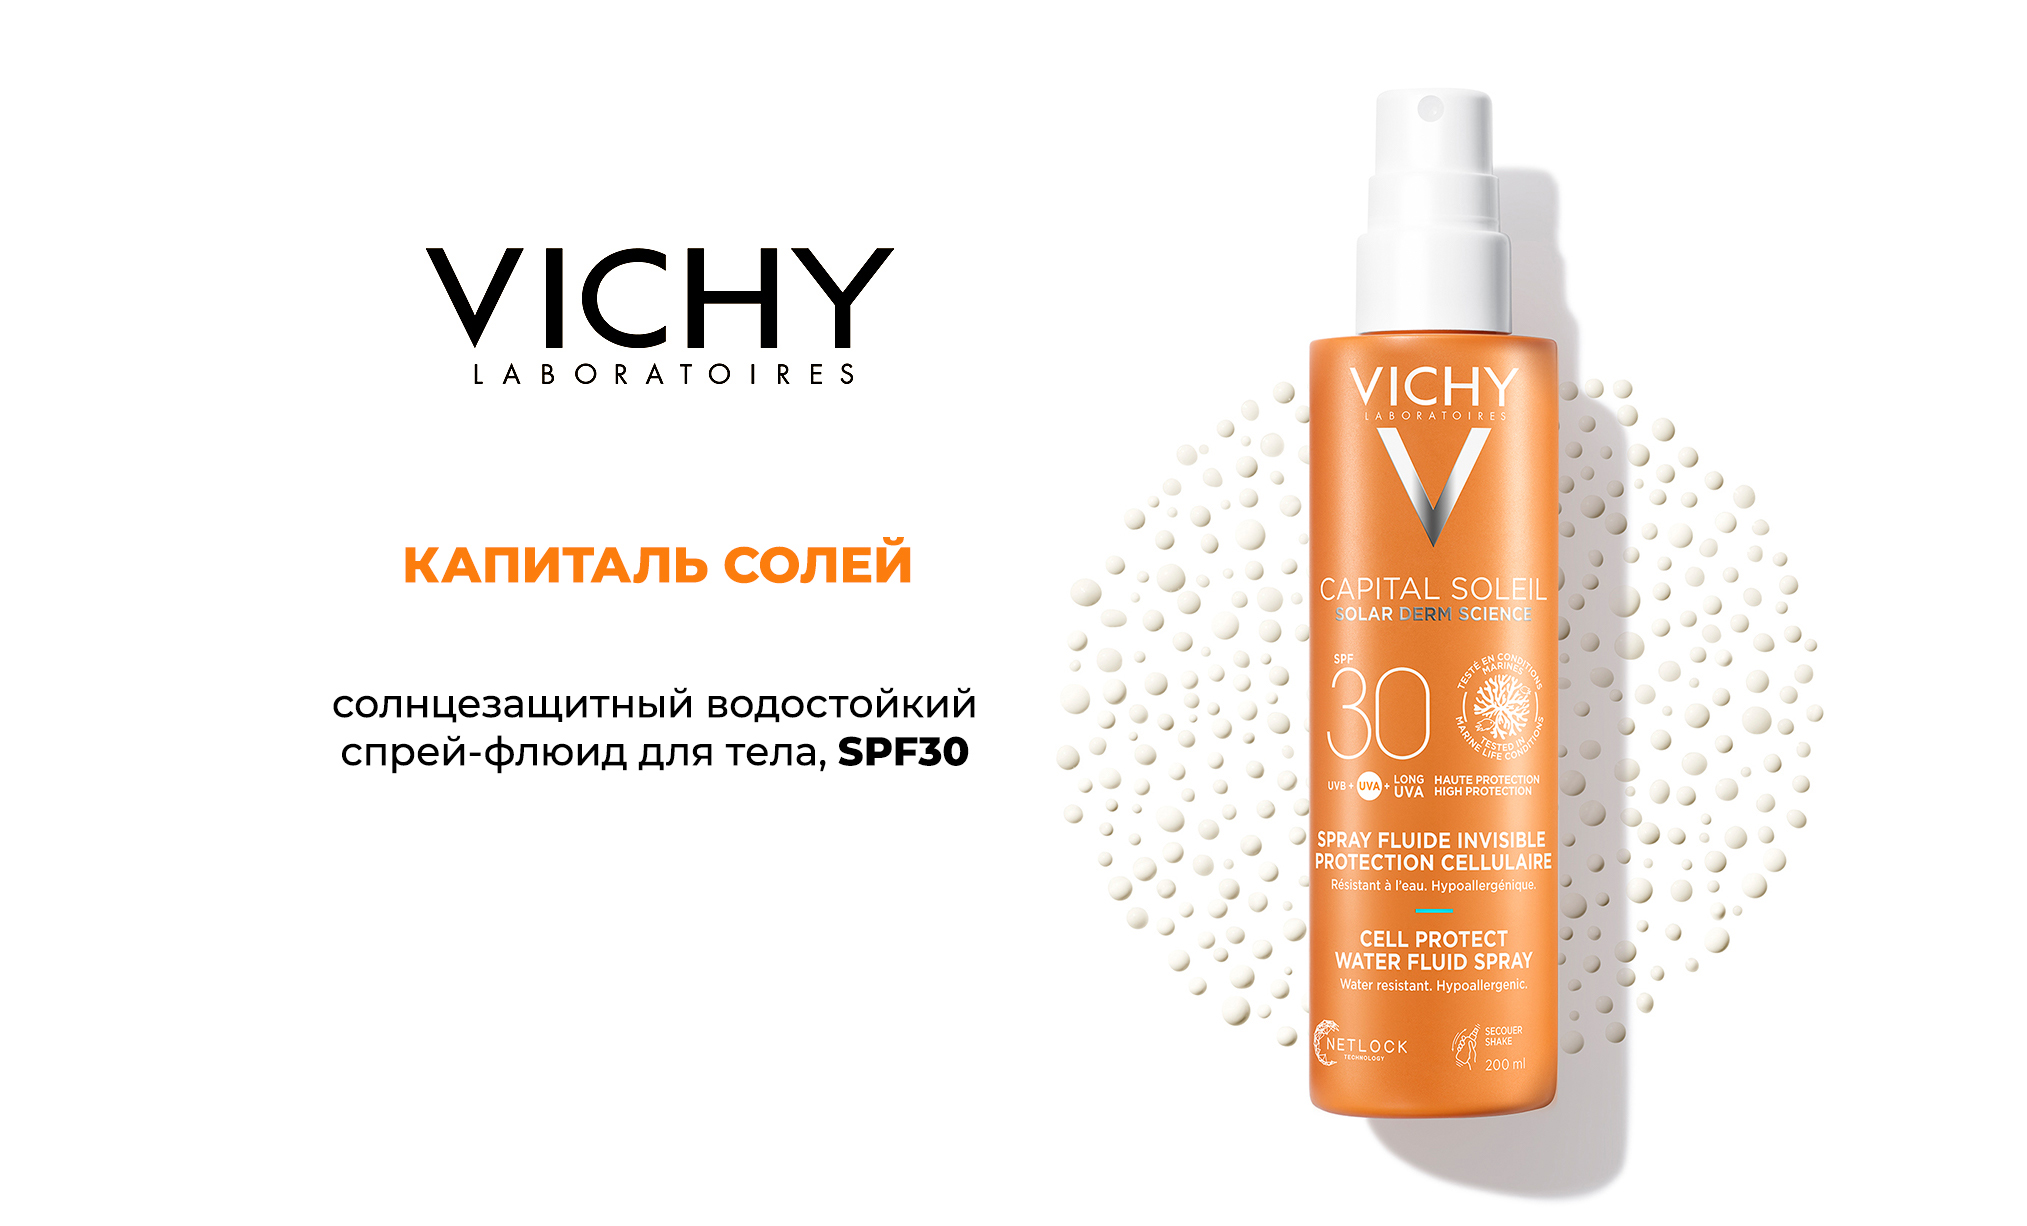 Vichy Capital Soleil Cell Protect Water Fluid Spray SPF30